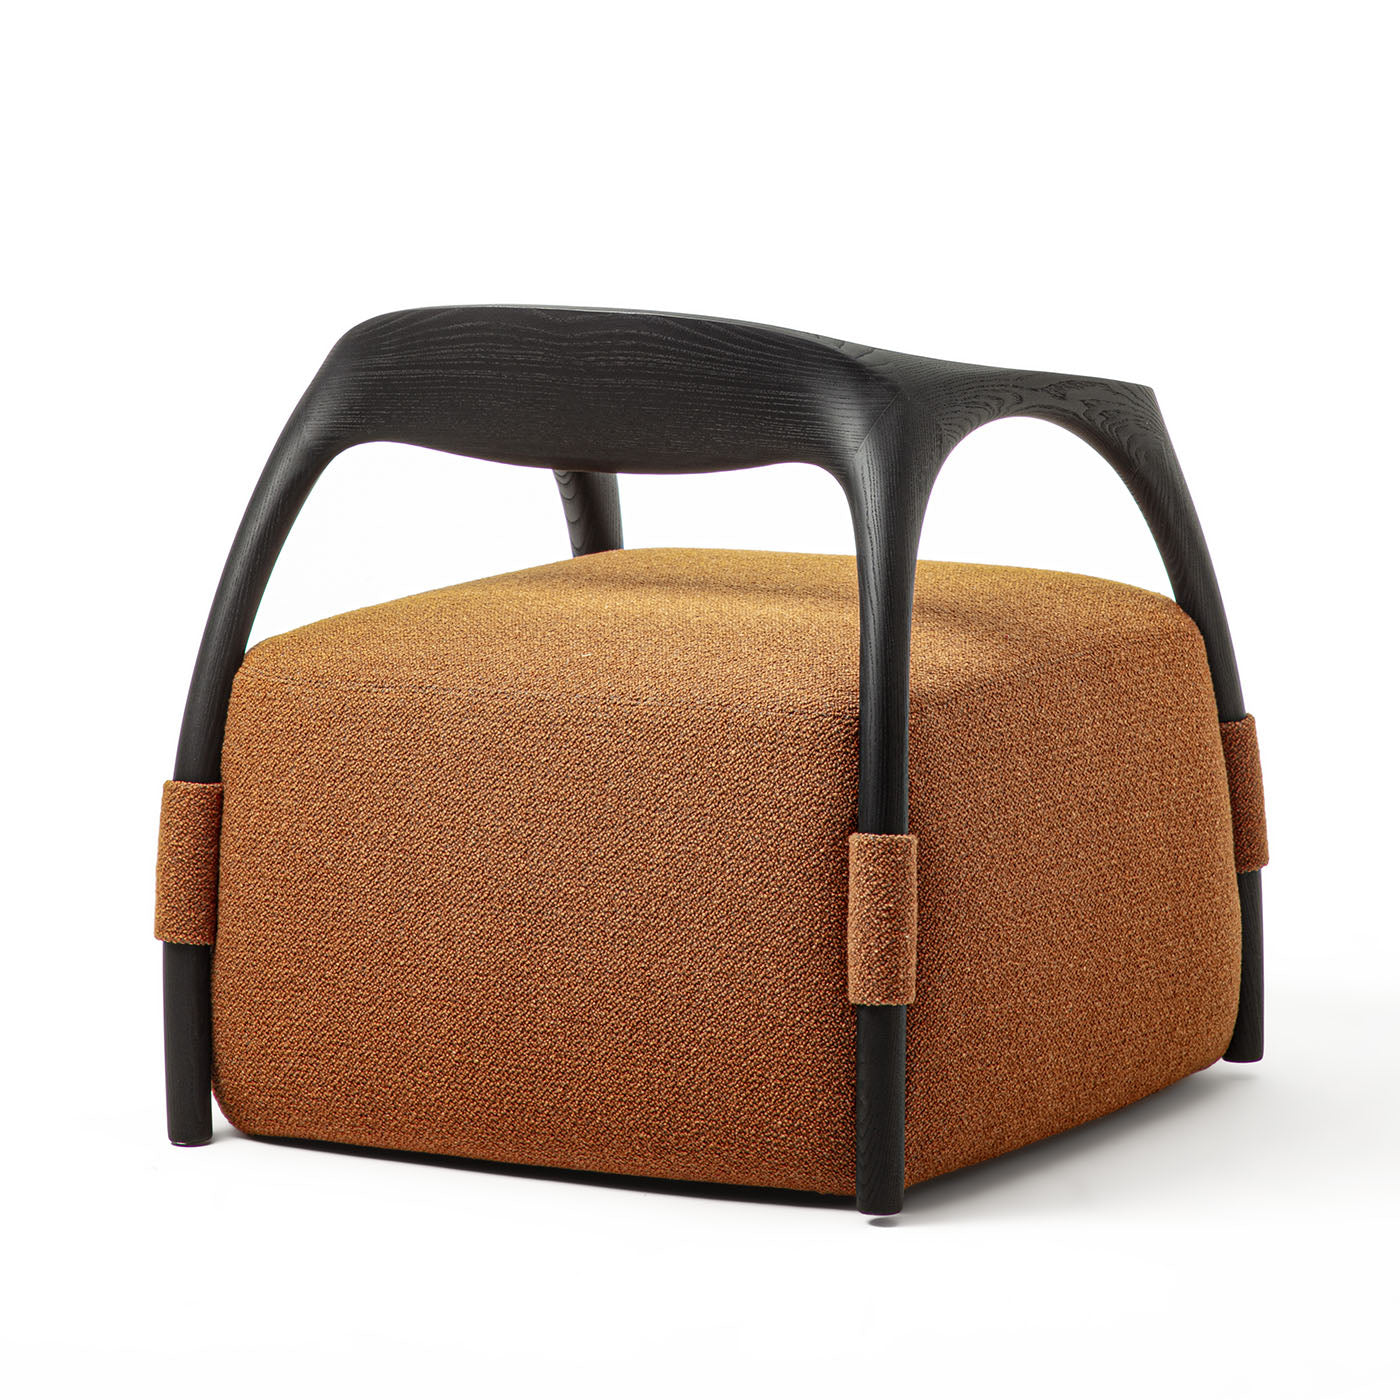 Chassis Black Ash Solid Wood Armchair & Orange Fabric Upholstery - Alternative view 1